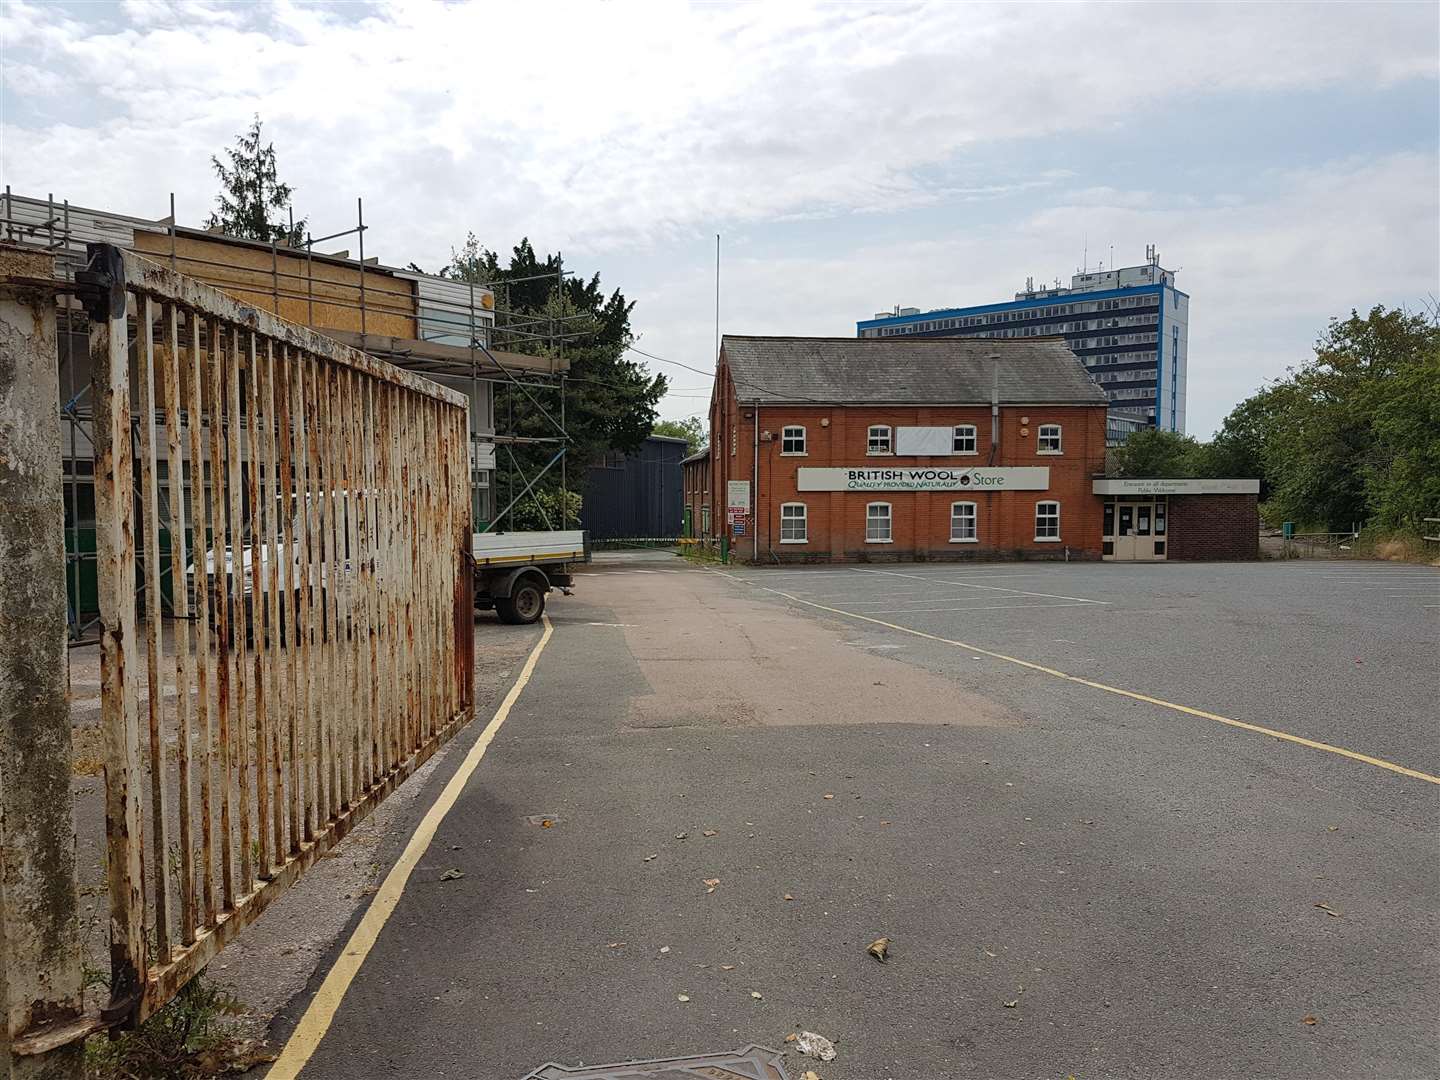 The now-disused Kent Wool Growers site